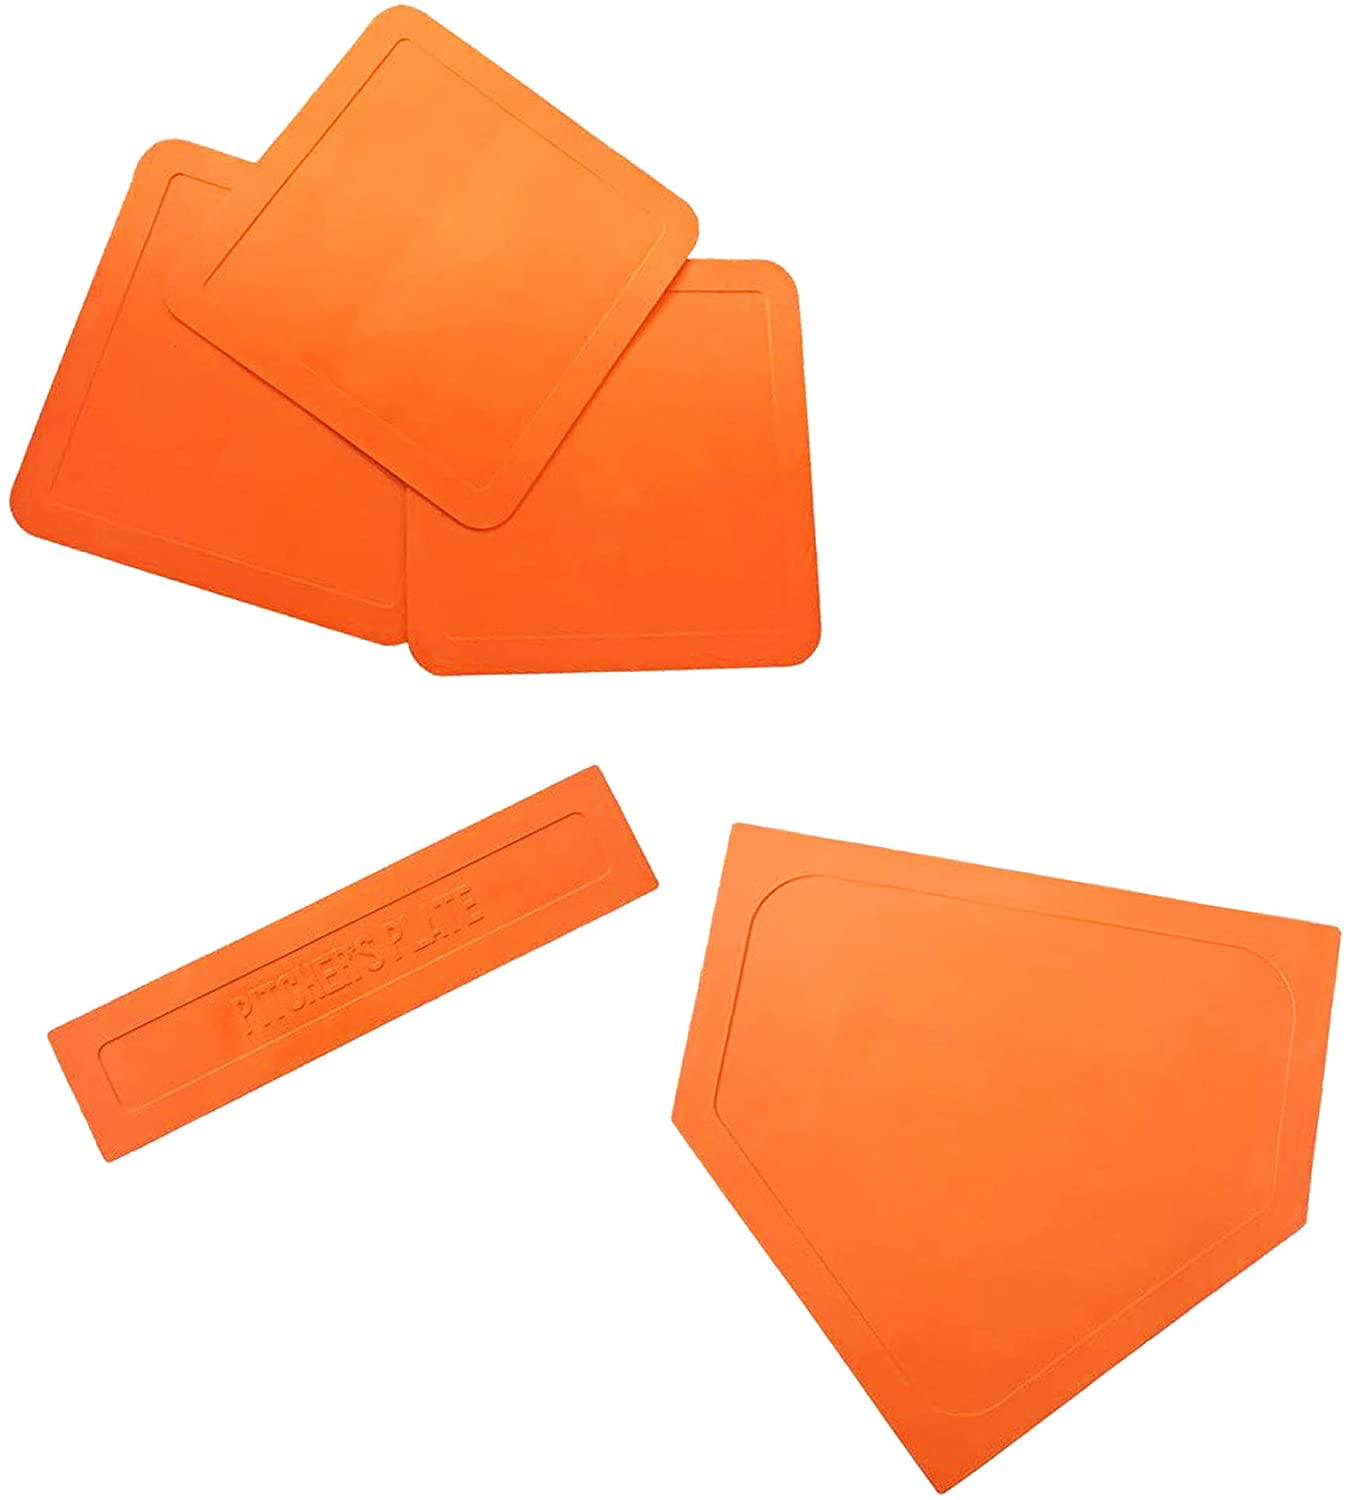 DELUXE Softball BASEBALL BASES 5pc Orange Rubber Outdoor Indoor Sports Play NEW 